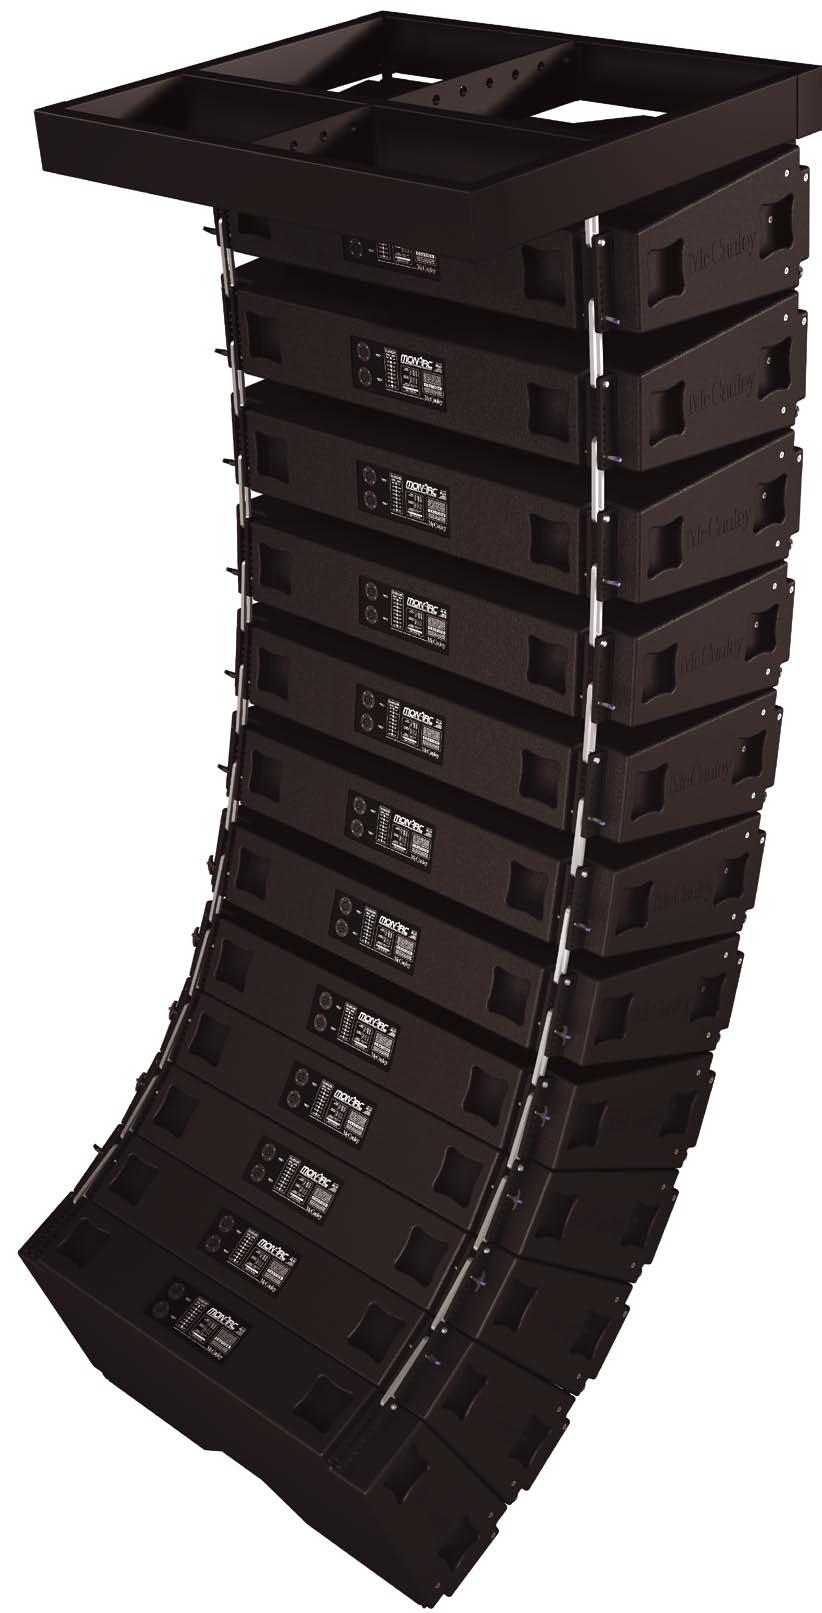 Completely contained and stored within the array, the MONARC Integrated Rigging System is the only line array suspension technology ever created that allows requires NO tools to assemble, has NO